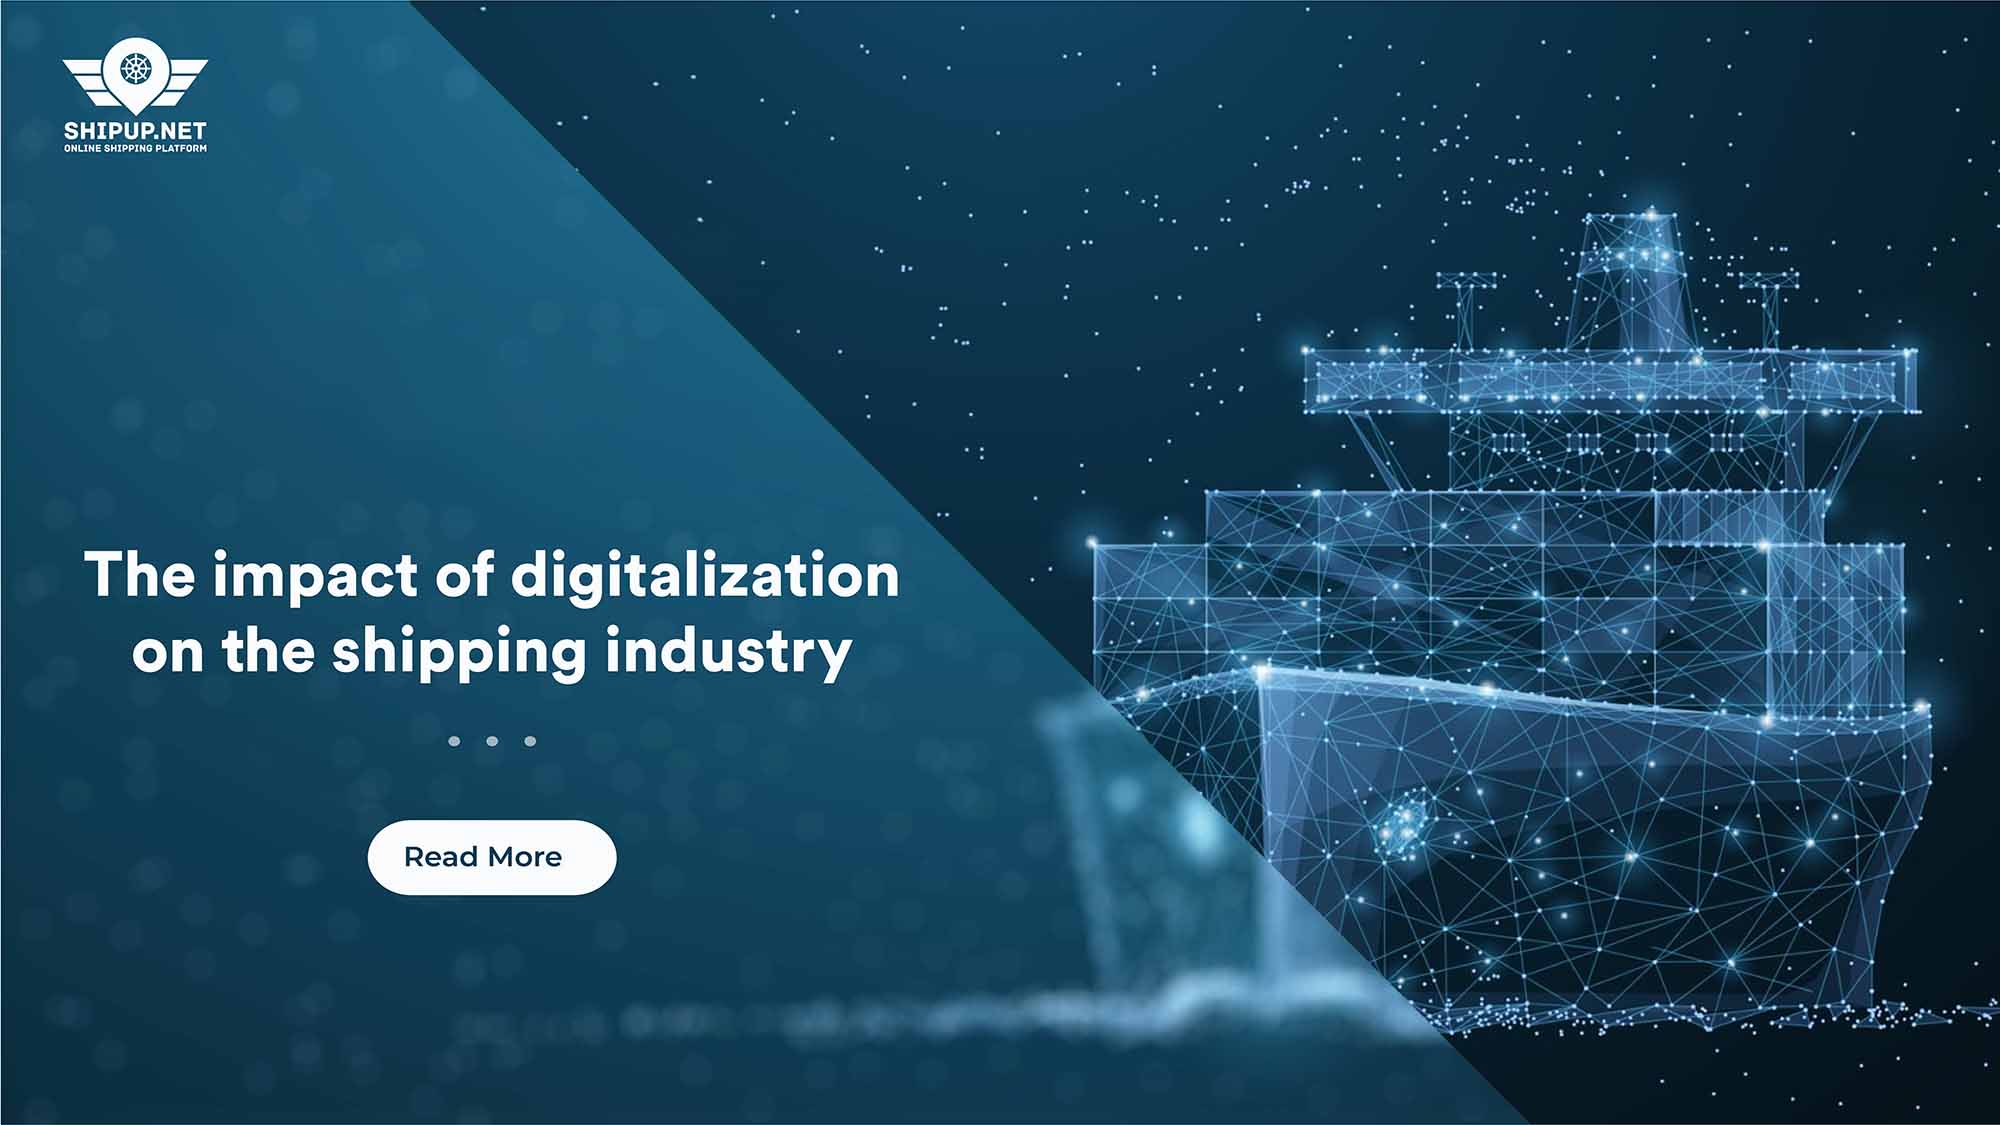 The impact of digitalization on the shipping industry